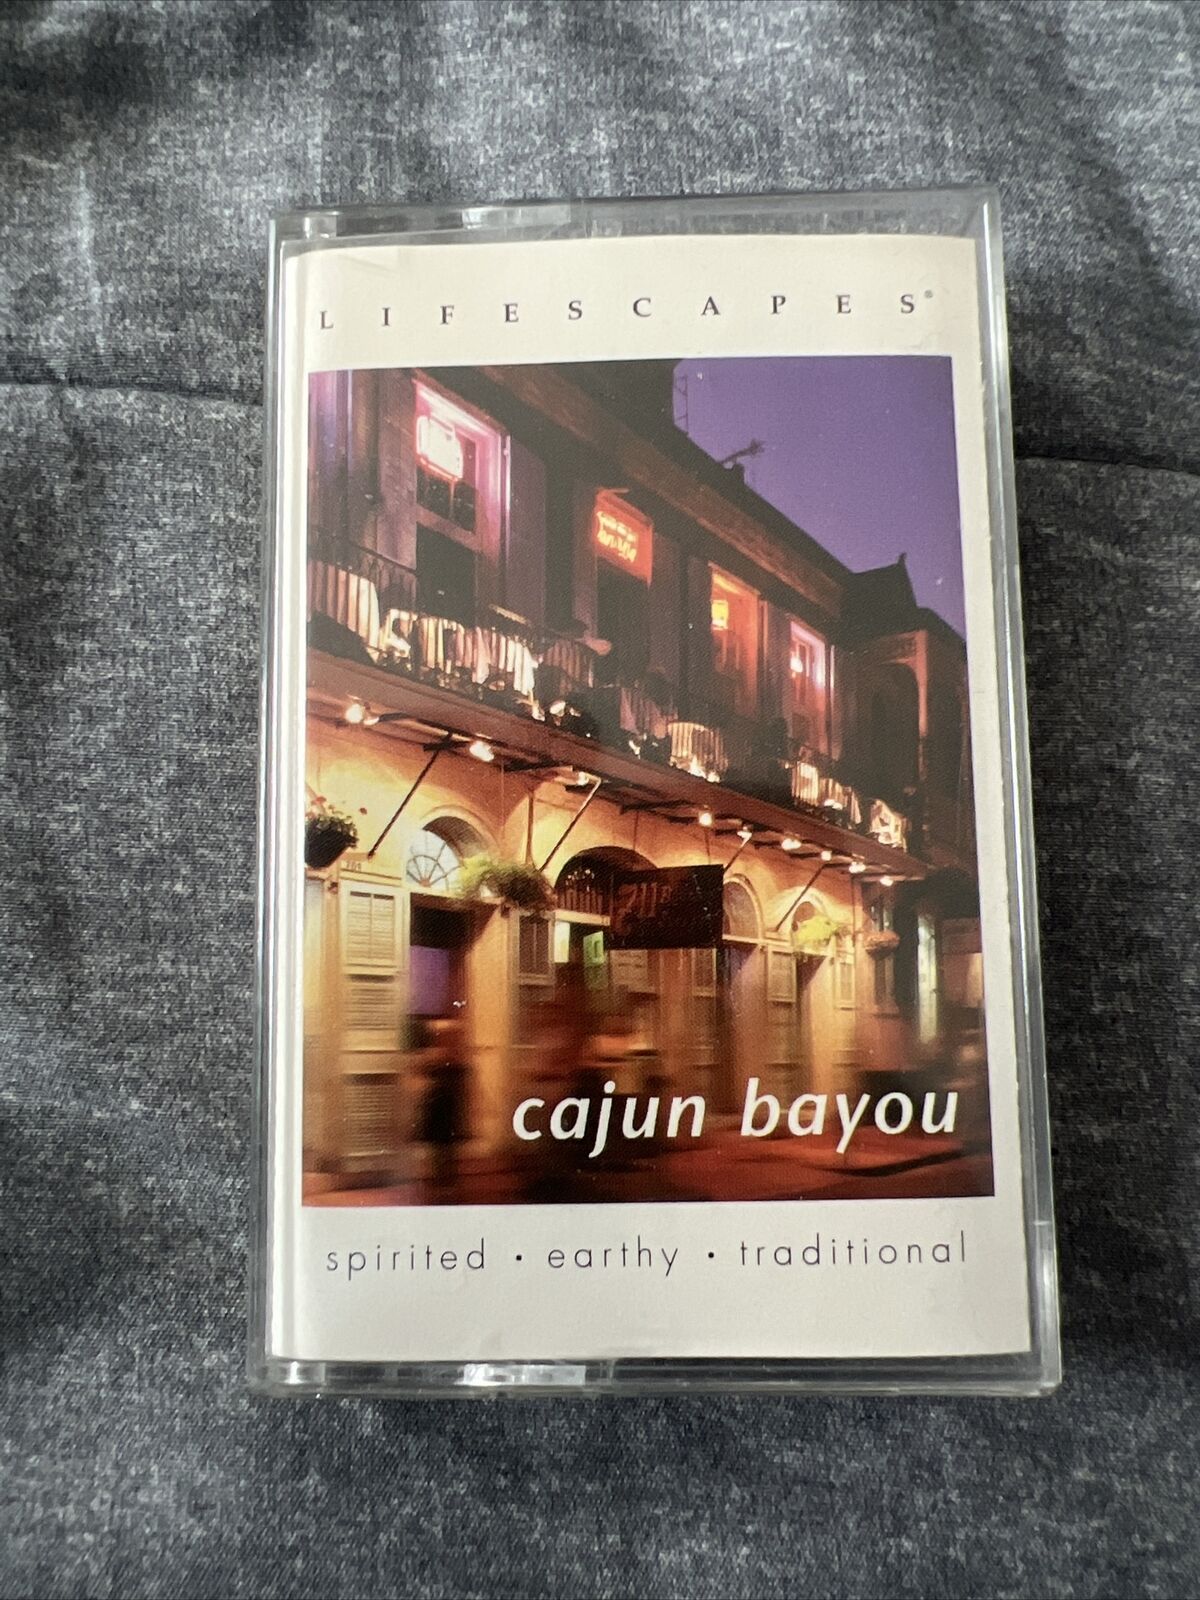 CAJUN BAYOU TRADITIONAL BALLADS BY LIFESCAPE ON CASSETTE.